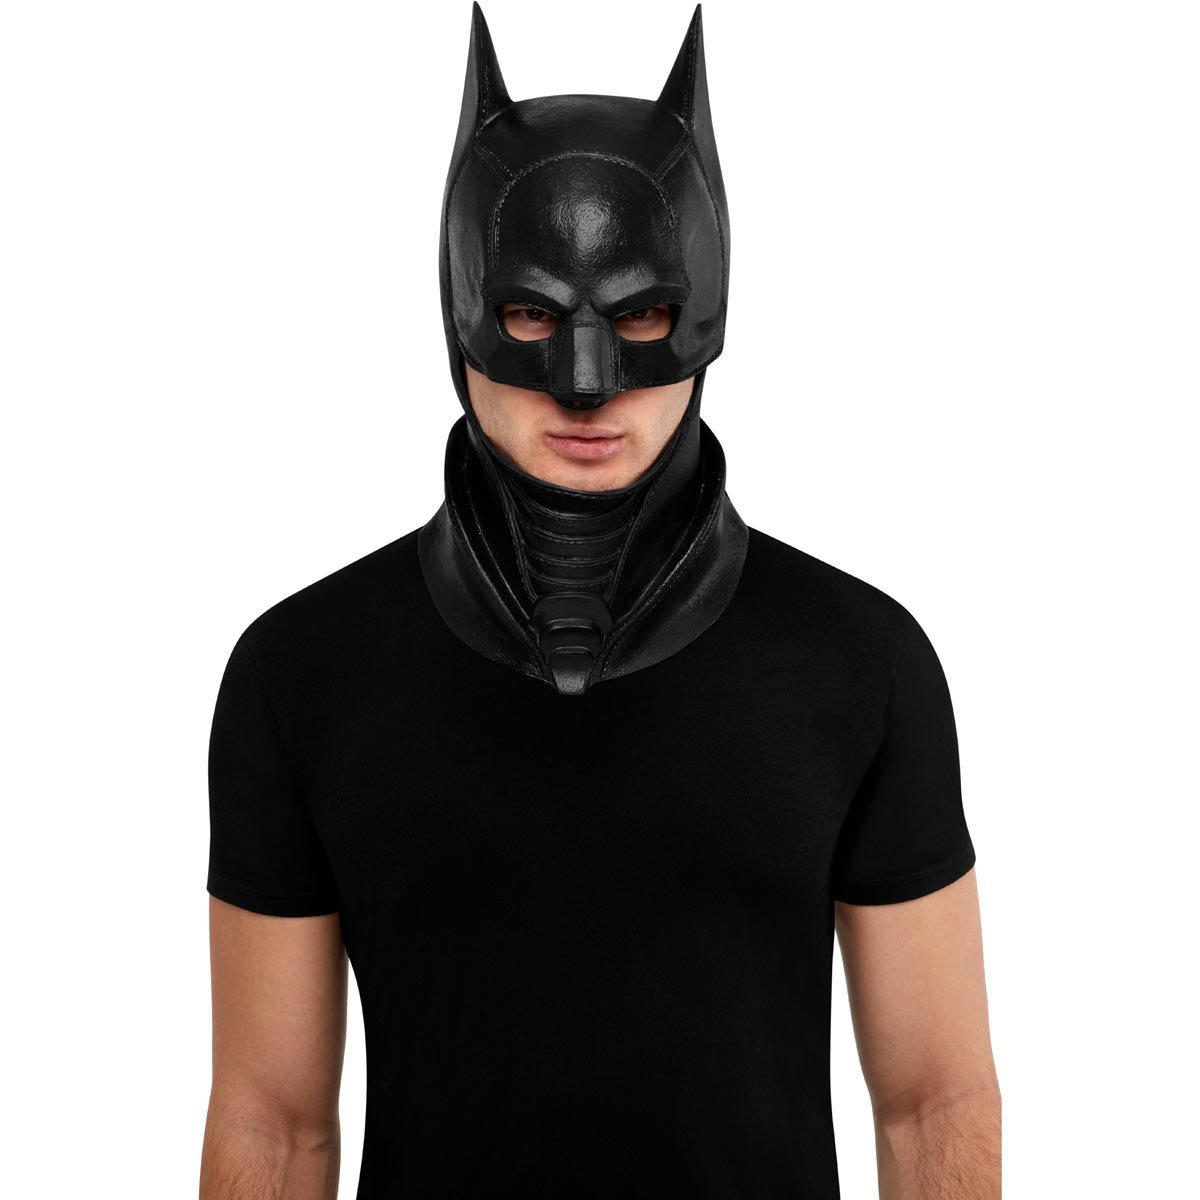 Rubies The Batman Adult Deluxe Mask